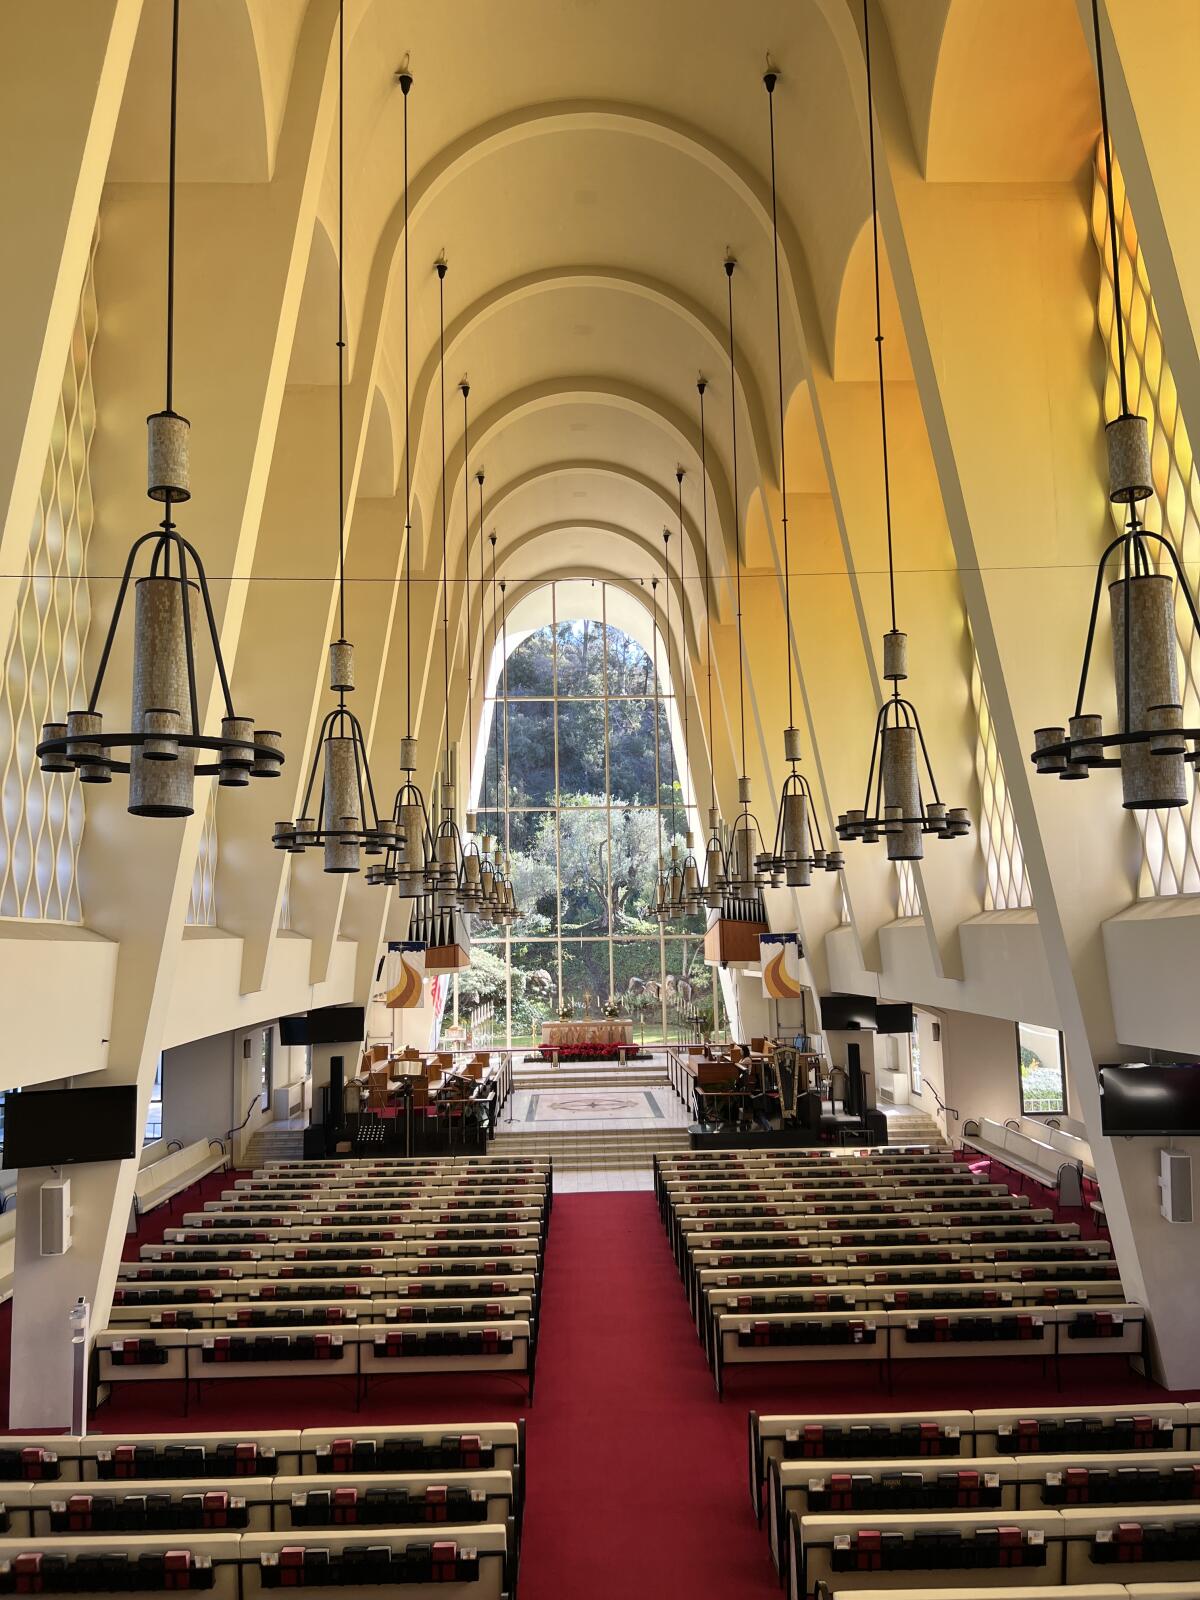 The interior of First United Methodist Church in Mission Valley, San Diego.